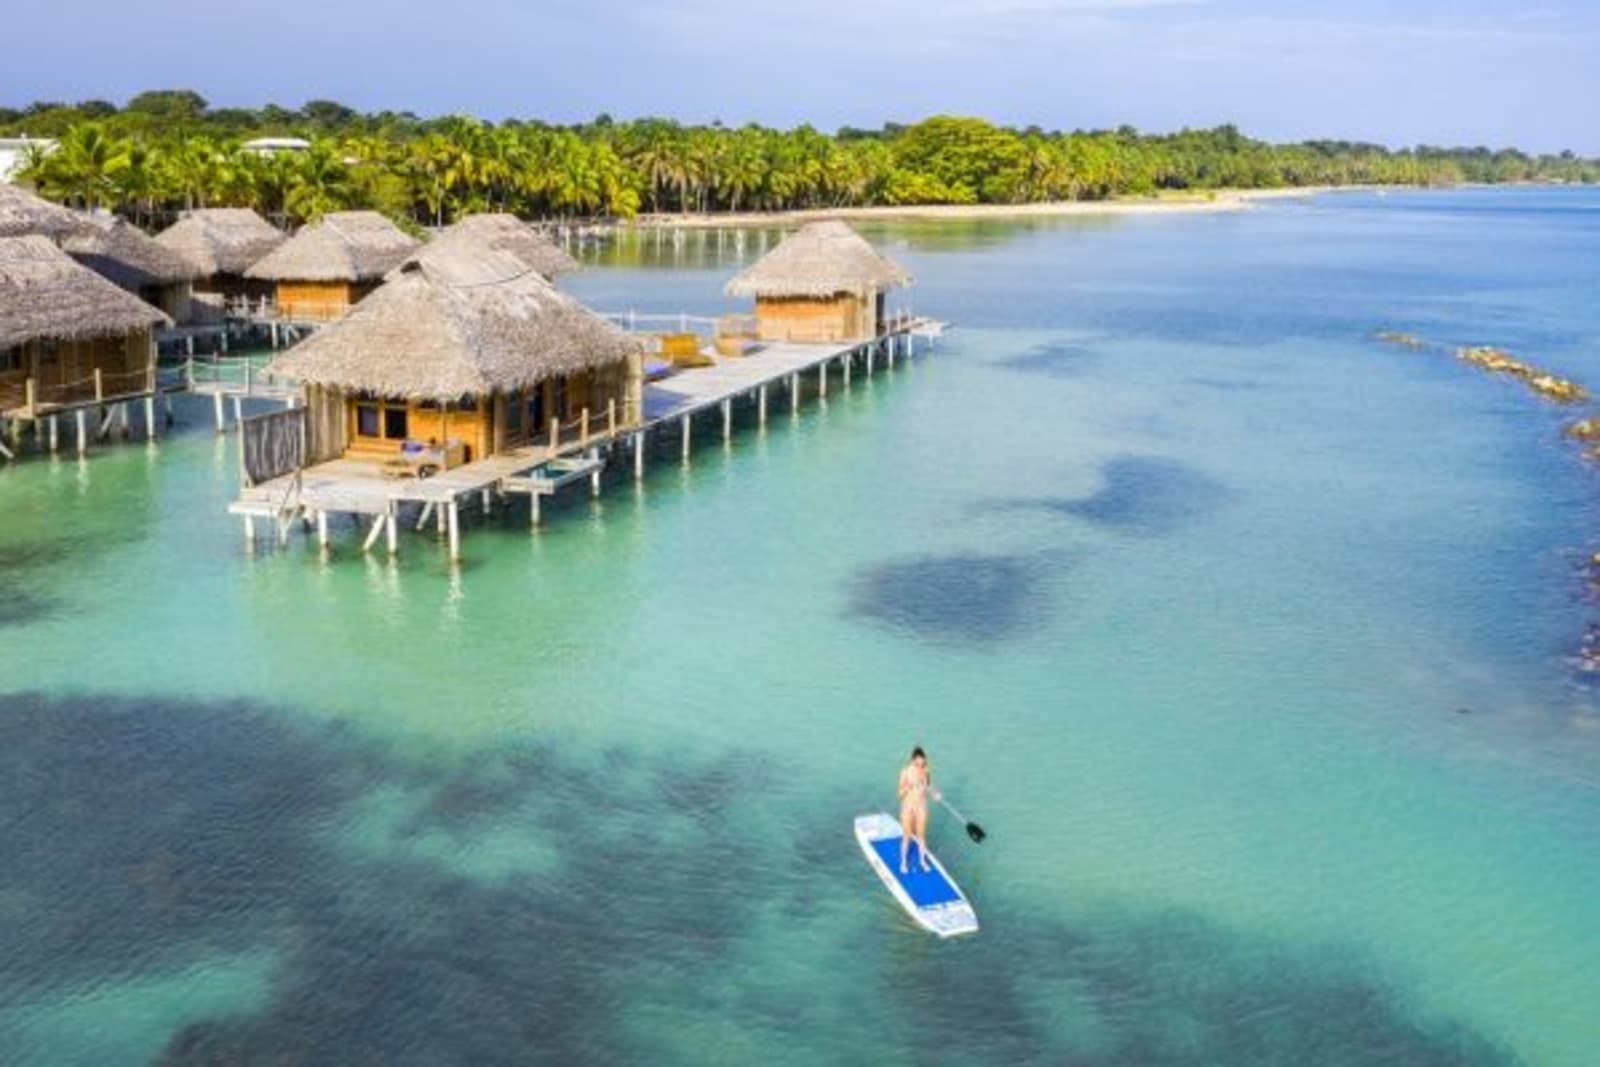 Woman paddle boarding in clear water next to floating resort